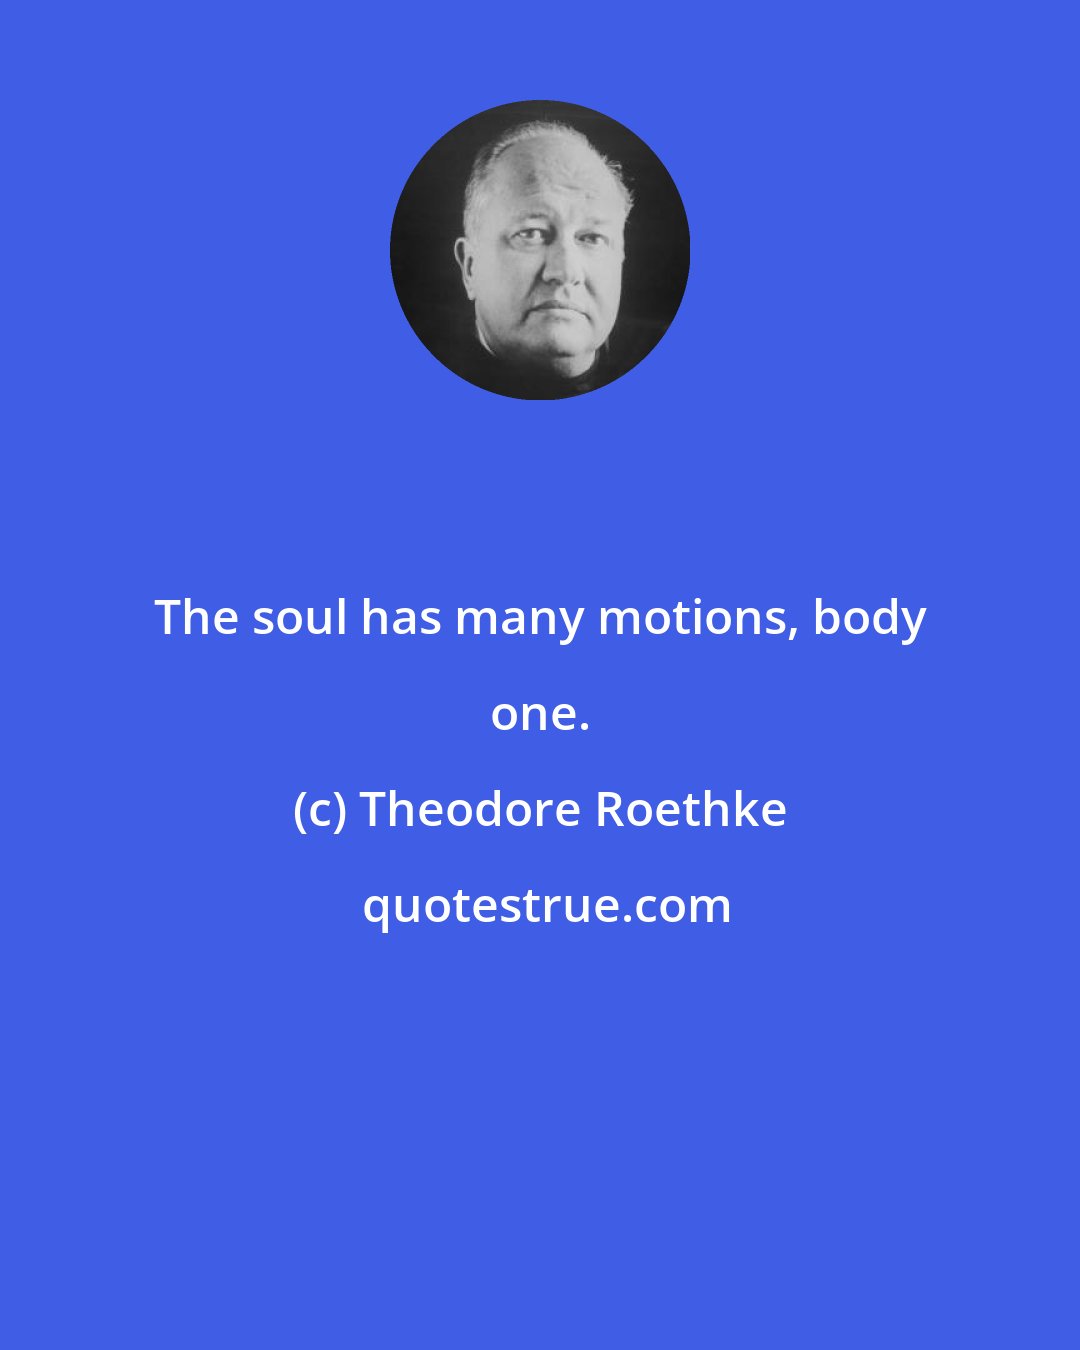 Theodore Roethke: The soul has many motions, body one.